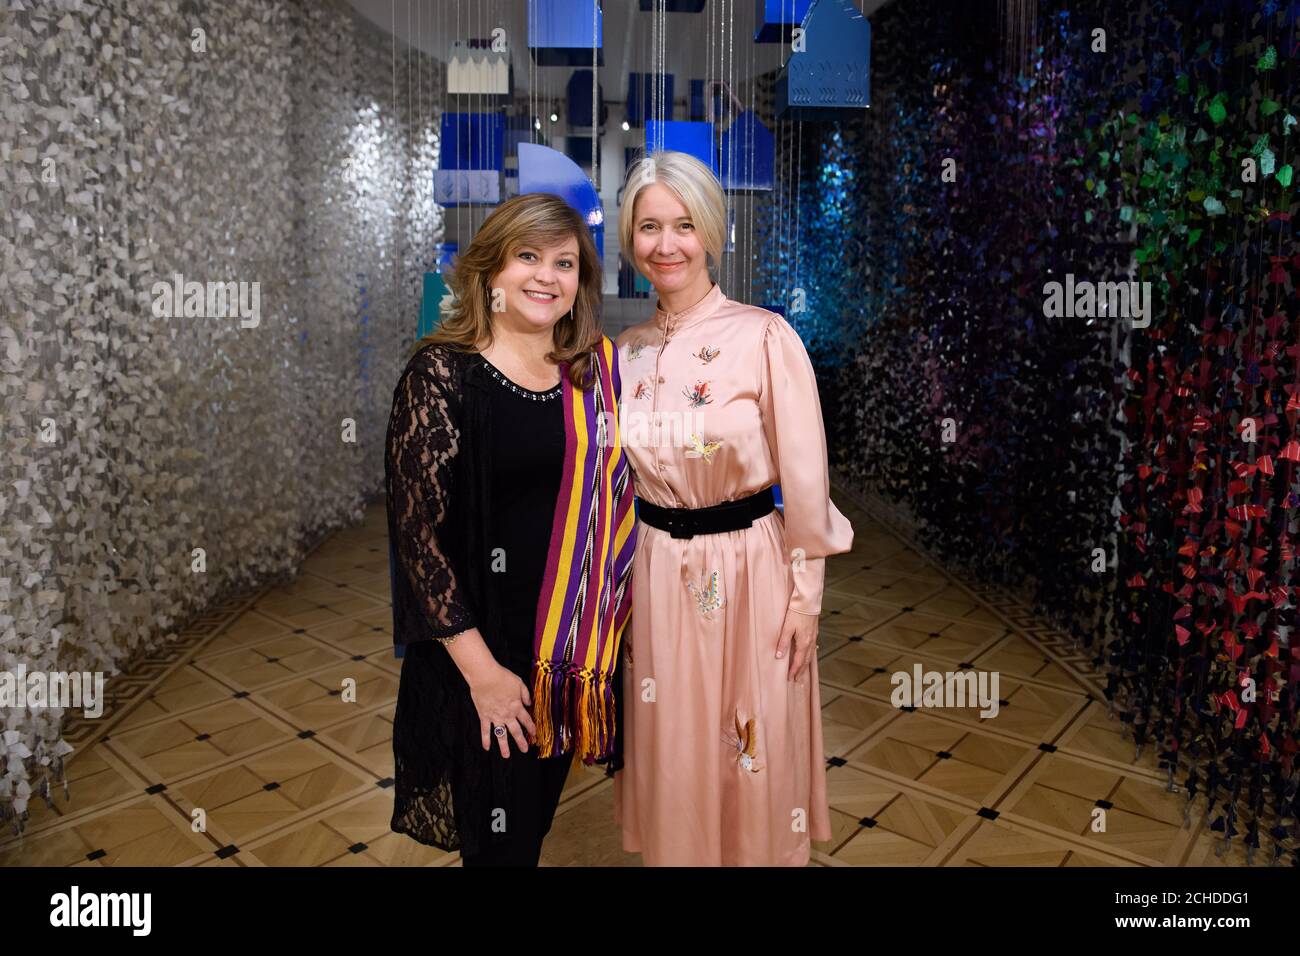 EDITORIAL USE ONLY Cecilia Santamarina de orive from Guatemala the winner of the London Design Biennale 2018 Public Medal, and Justine Simons (right), Deputy Mayor for Culture and the Creative Industries, at Somerset House, London.  Stock Photo